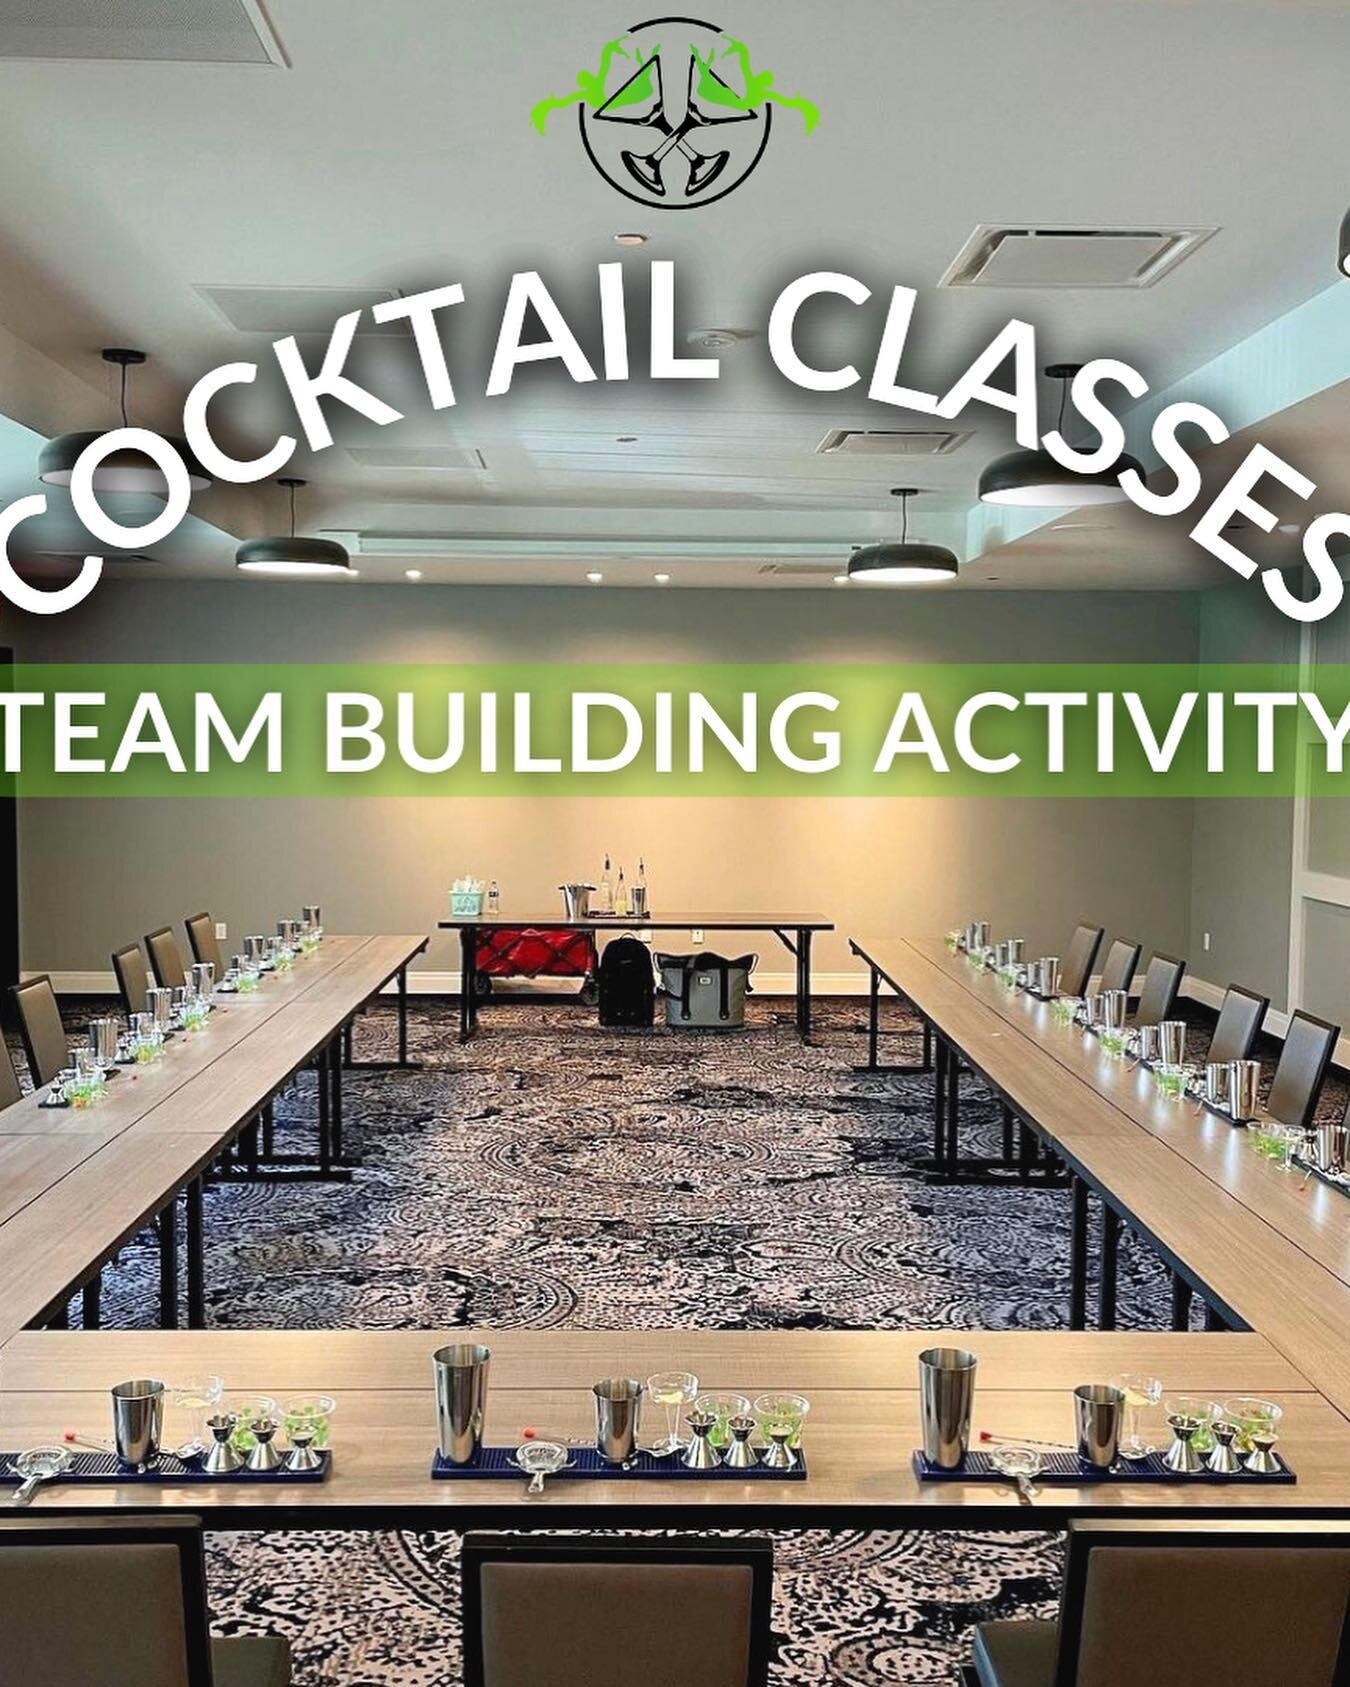 If you're looking for a fun and unique way to bond with your team, our cocktail class is the perfect team-building activity! During our class, you'll have the opportunity to work together, share ideas, and learn new skills in a fun and relaxed enviro